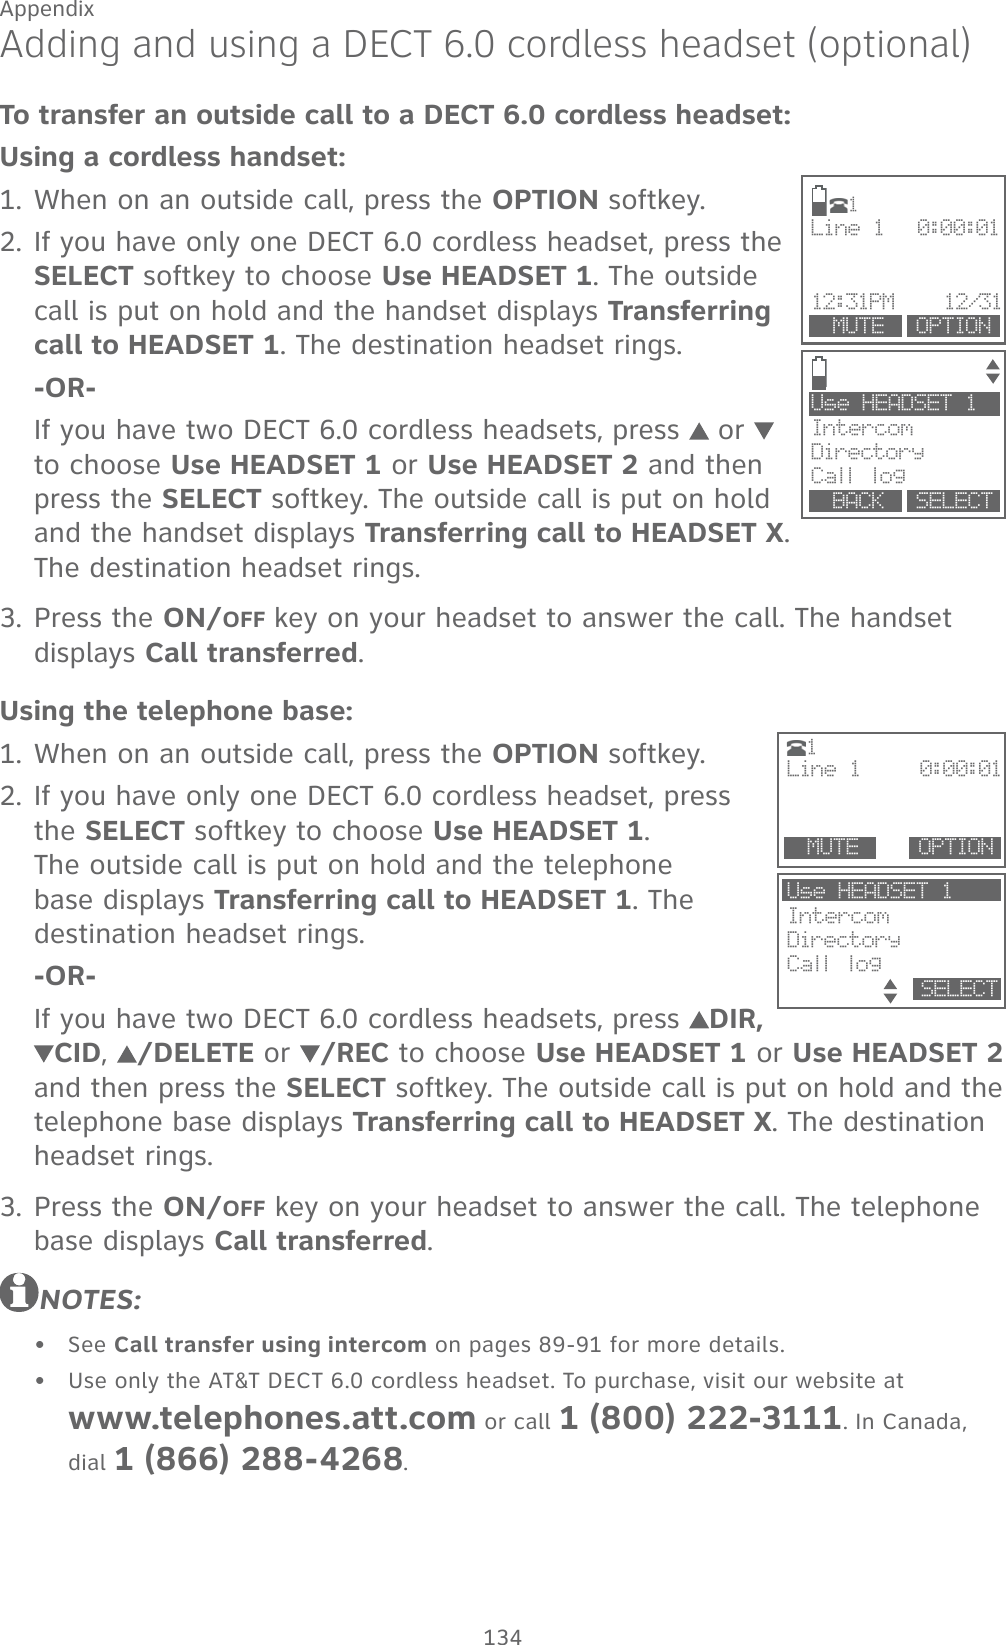 134AppendixAdding and using a DECT 6.0 cordless headset (optional)To transfer an outside call to a DECT 6.0 cordless headset:Using a cordless handset:When on an outside call, press the OPTION softkey.If you have only one DECT 6.0 cordless headset, press the SELECT softkey to choose Use HEADSET 1. The outside call is put on hold and the handset displays Transferring call to HEADSET 1. The destination headset rings.-OR-If you have two DECT 6.0 cordless headsets, press   or   to choose Use HEADSET 1 or Use HEADSET 2 and then press the SELECT softkey. The outside call is put on hold and the handset displays Transferring call to HEADSET X. The destination headset rings.Press the ON/OFF key on your headset to answer the call. The handset displays Call transferred.Using the telephone base:When on an outside call, press the OPTION softkey.If you have only one DECT 6.0 cordless headset, press the SELECT softkey to choose Use HEADSET 1.  The outside call is put on hold and the telephone base displays Transferring call to HEADSET 1. The destination headset rings.-OR-If you have two DECT 6.0 cordless headsets, press  DIR, CID,  /DELETE or /REC to choose Use HEADSET 1 or Use HEADSET 2 and then press the SELECT softkey. The outside call is put on hold and the telephone base displays Transferring call to HEADSET X. The destination headset rings.Press the ON/OFF key on your headset to answer the call. The telephone base displays Call transferred.NOTES:See Call transfer using intercom on pages 89-91 for more details.Use only the AT&amp;T DECT 6.0 cordless headset. To purchase, visit our website at  www.telephones.att.com or call 1 (800) 222-3111. In Canada, dial 1 (866) 288-4268.1.2.3.1.2.3.••Use HEADSET 1IntercomDirectory Call log  BACK    SELECTLine 1    0:00:01 12:31PM    12/31     MUTE    OPTION1Use HEADSET 1IntercomDirectory Call log           SELECTLine 1     0:00:01  MUTE        OPTION1